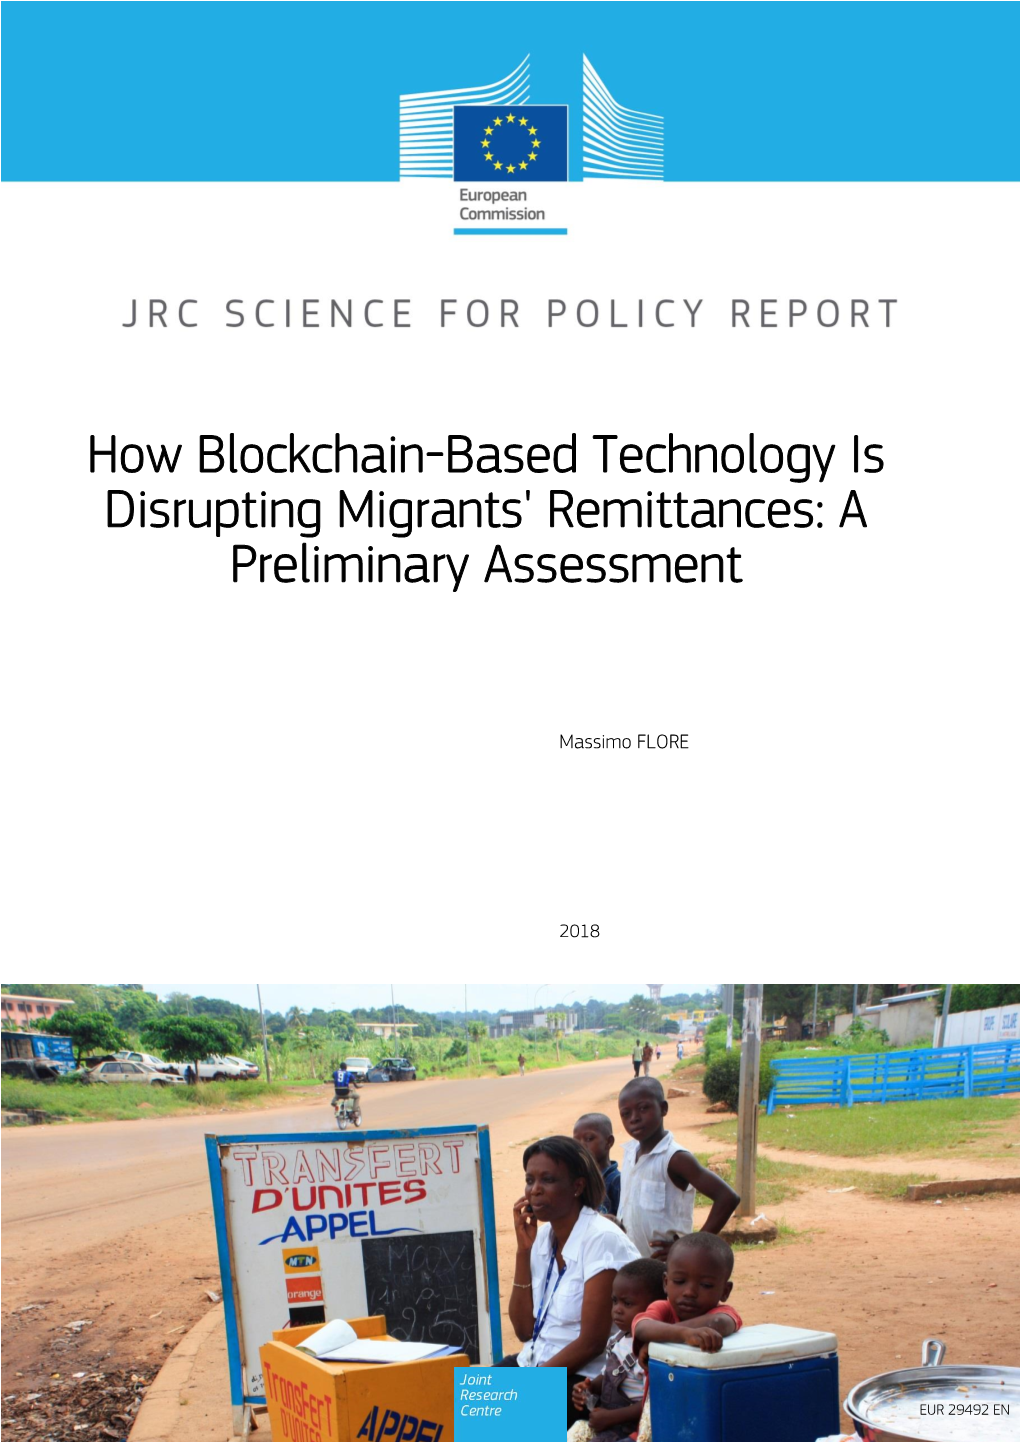 How Blockchain-Based Technology Is Disrupting Migrants' Remittances: a Preliminary Assessment